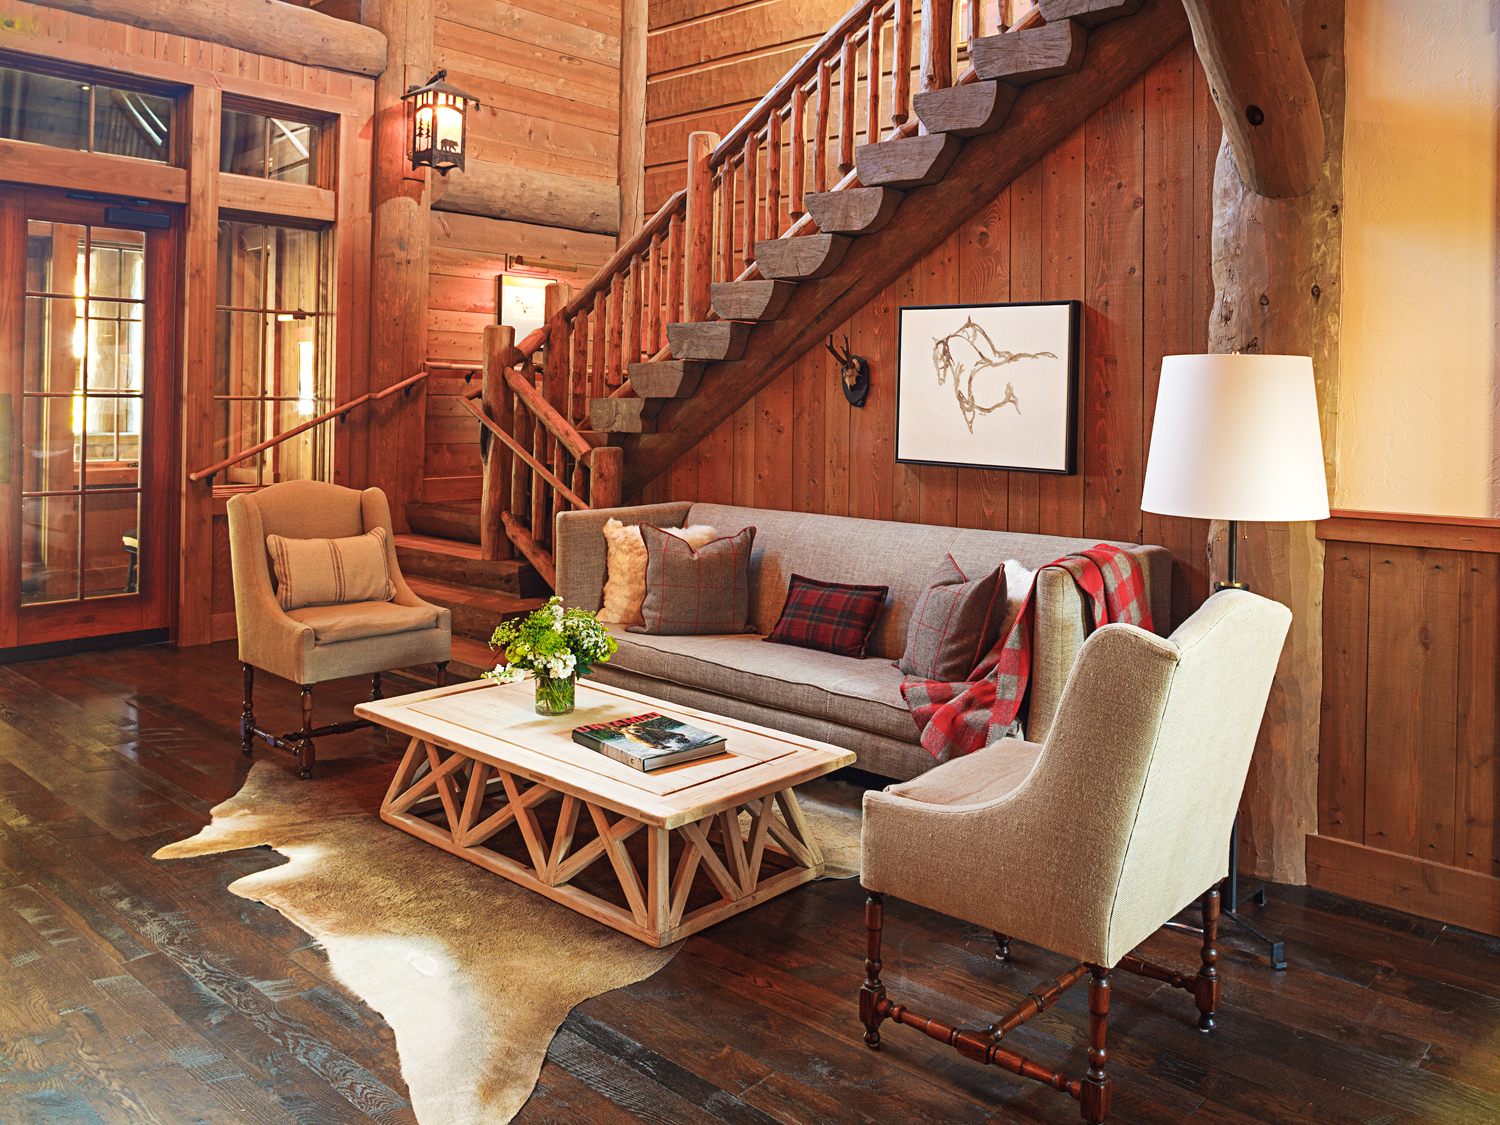 The Snake River Sporting Club’s intimate seating areas by WRJ Design create home-away-from-home comfort that combines rustic and contemporary for timeless appeal (photo by David Swift).